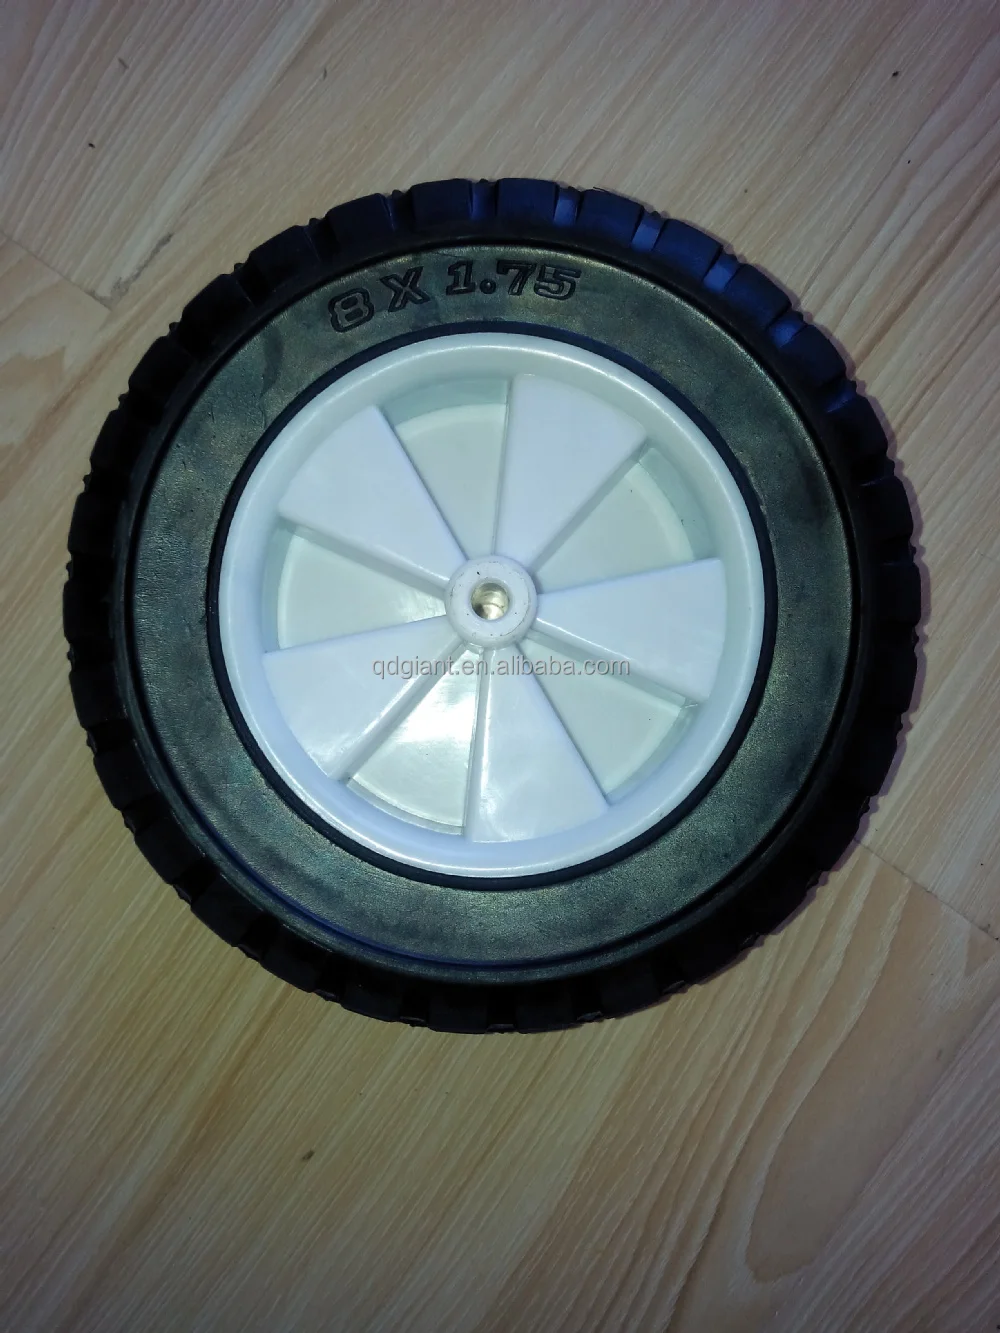 8inch tire with plastic wheels 8x1.75